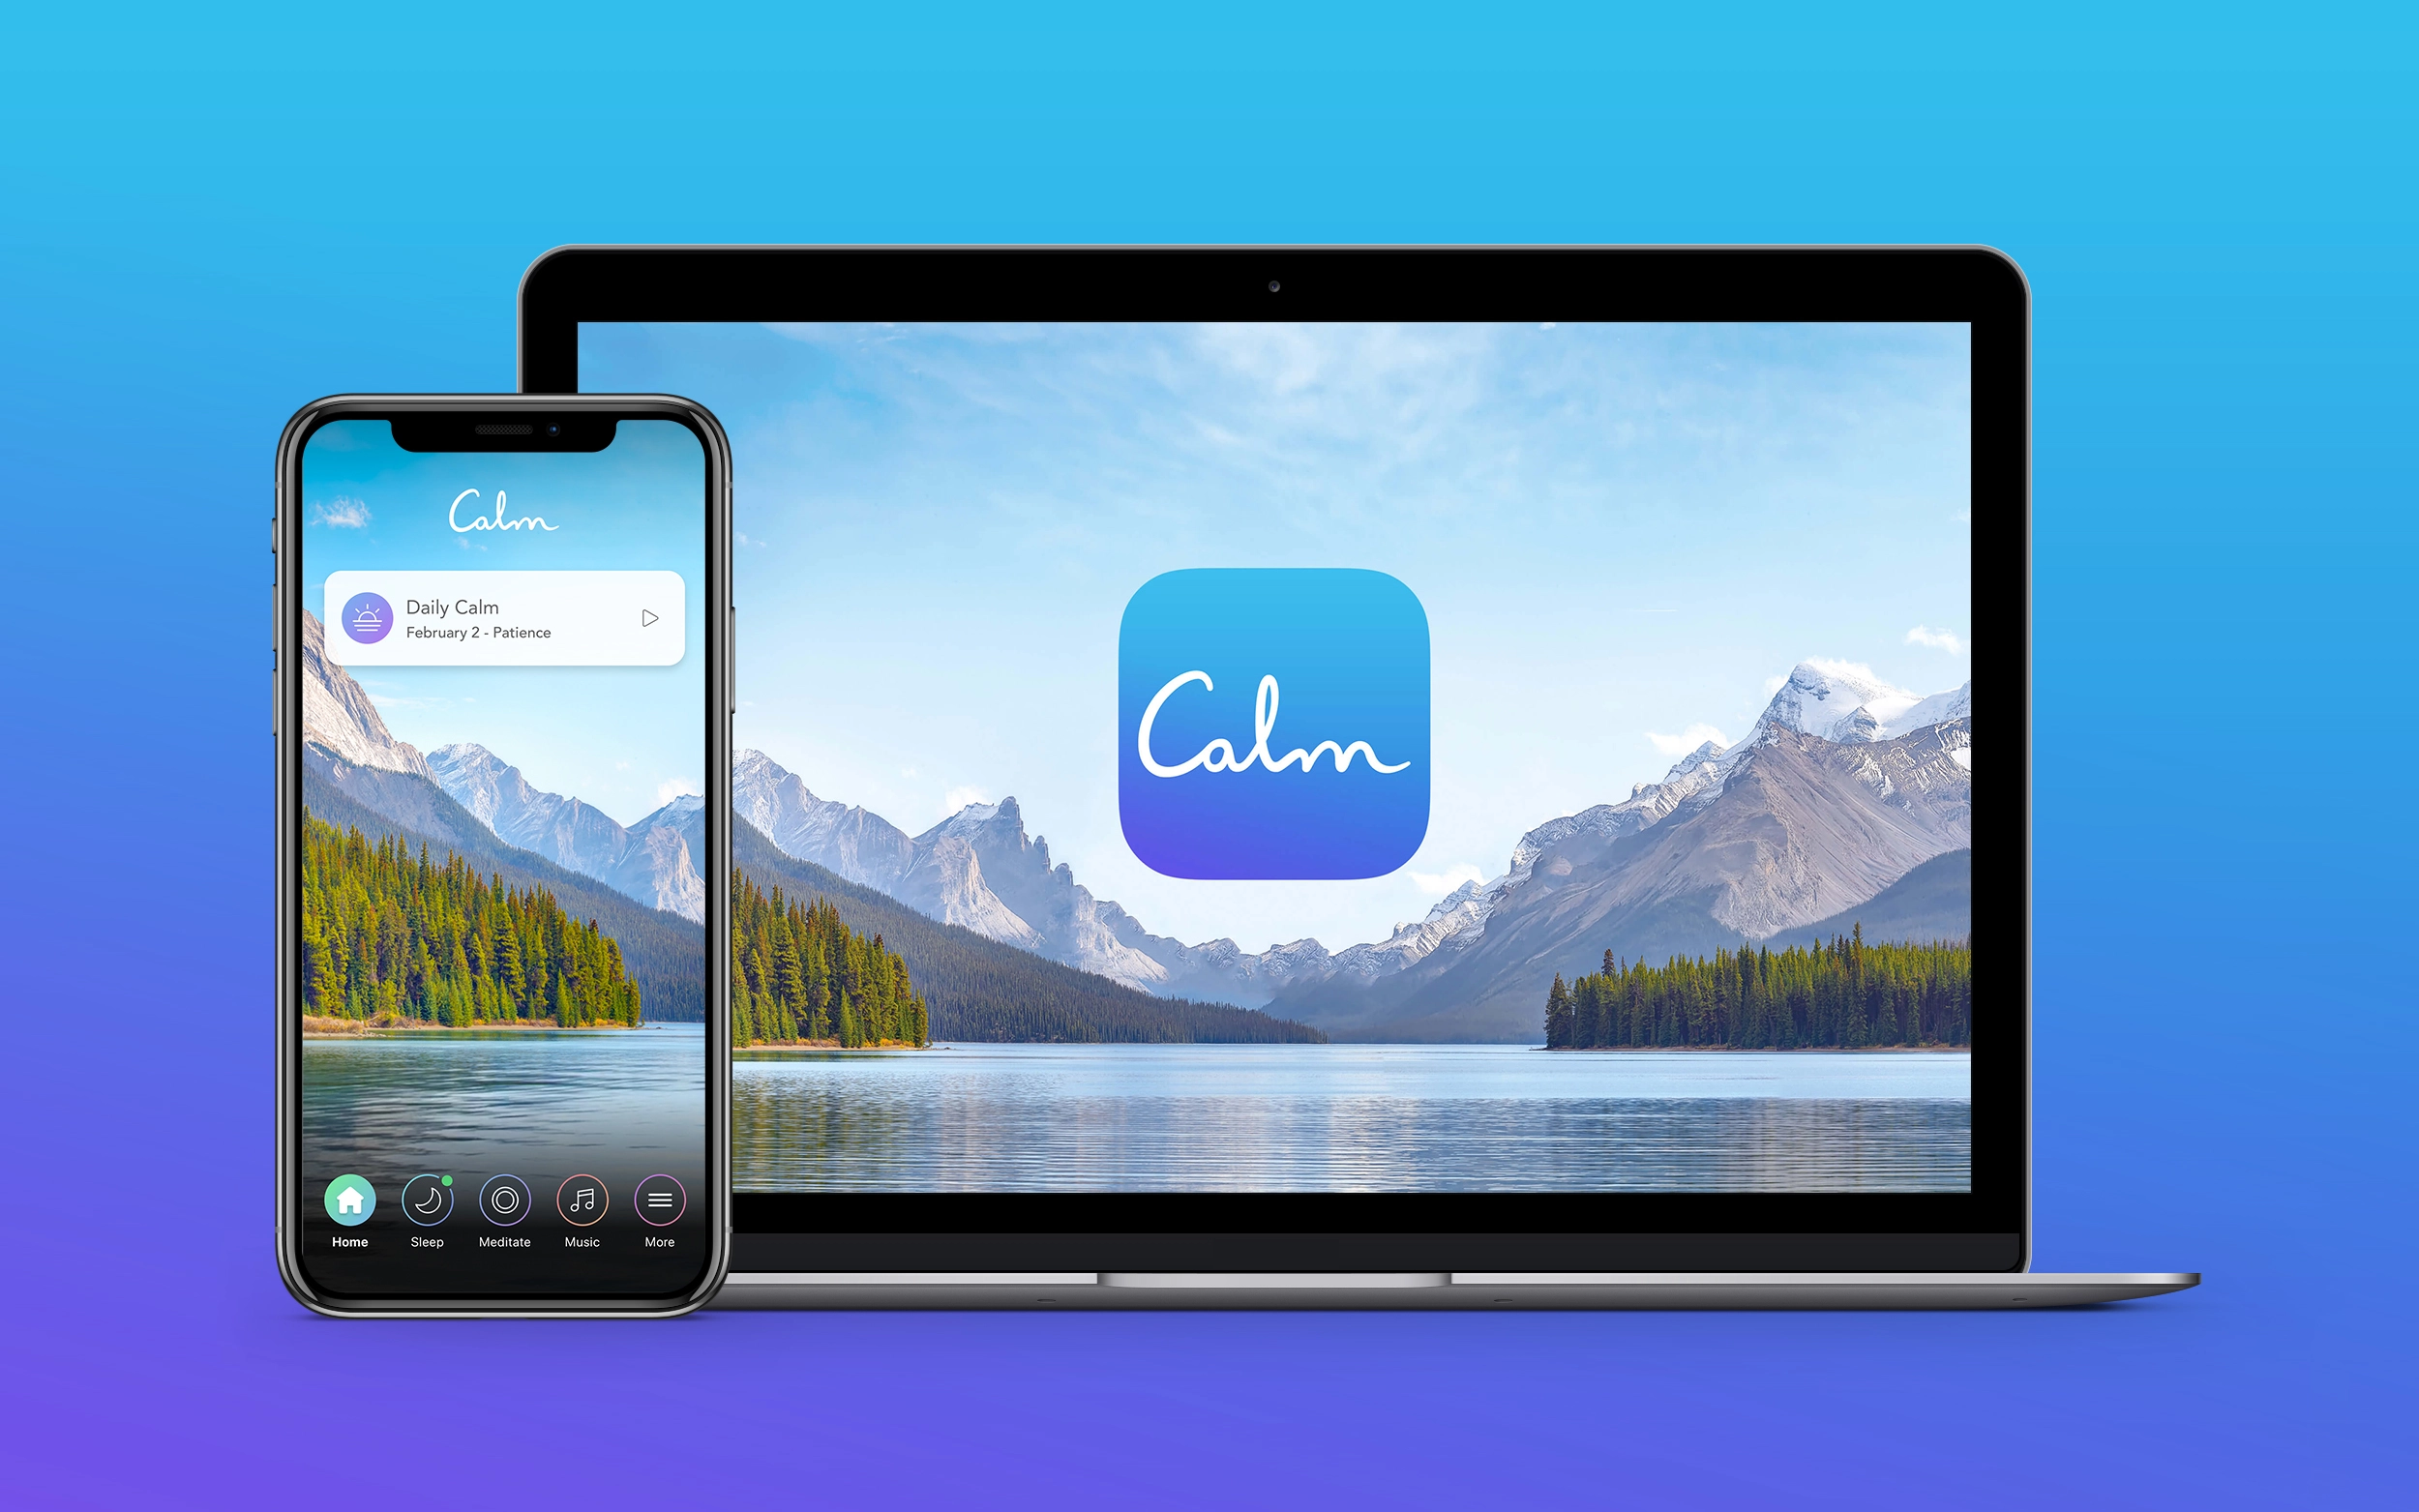 Calm Premium - 3 Months Trial Subscription Key (ONLY FOR NEW ACCOUNTS) 0.8$